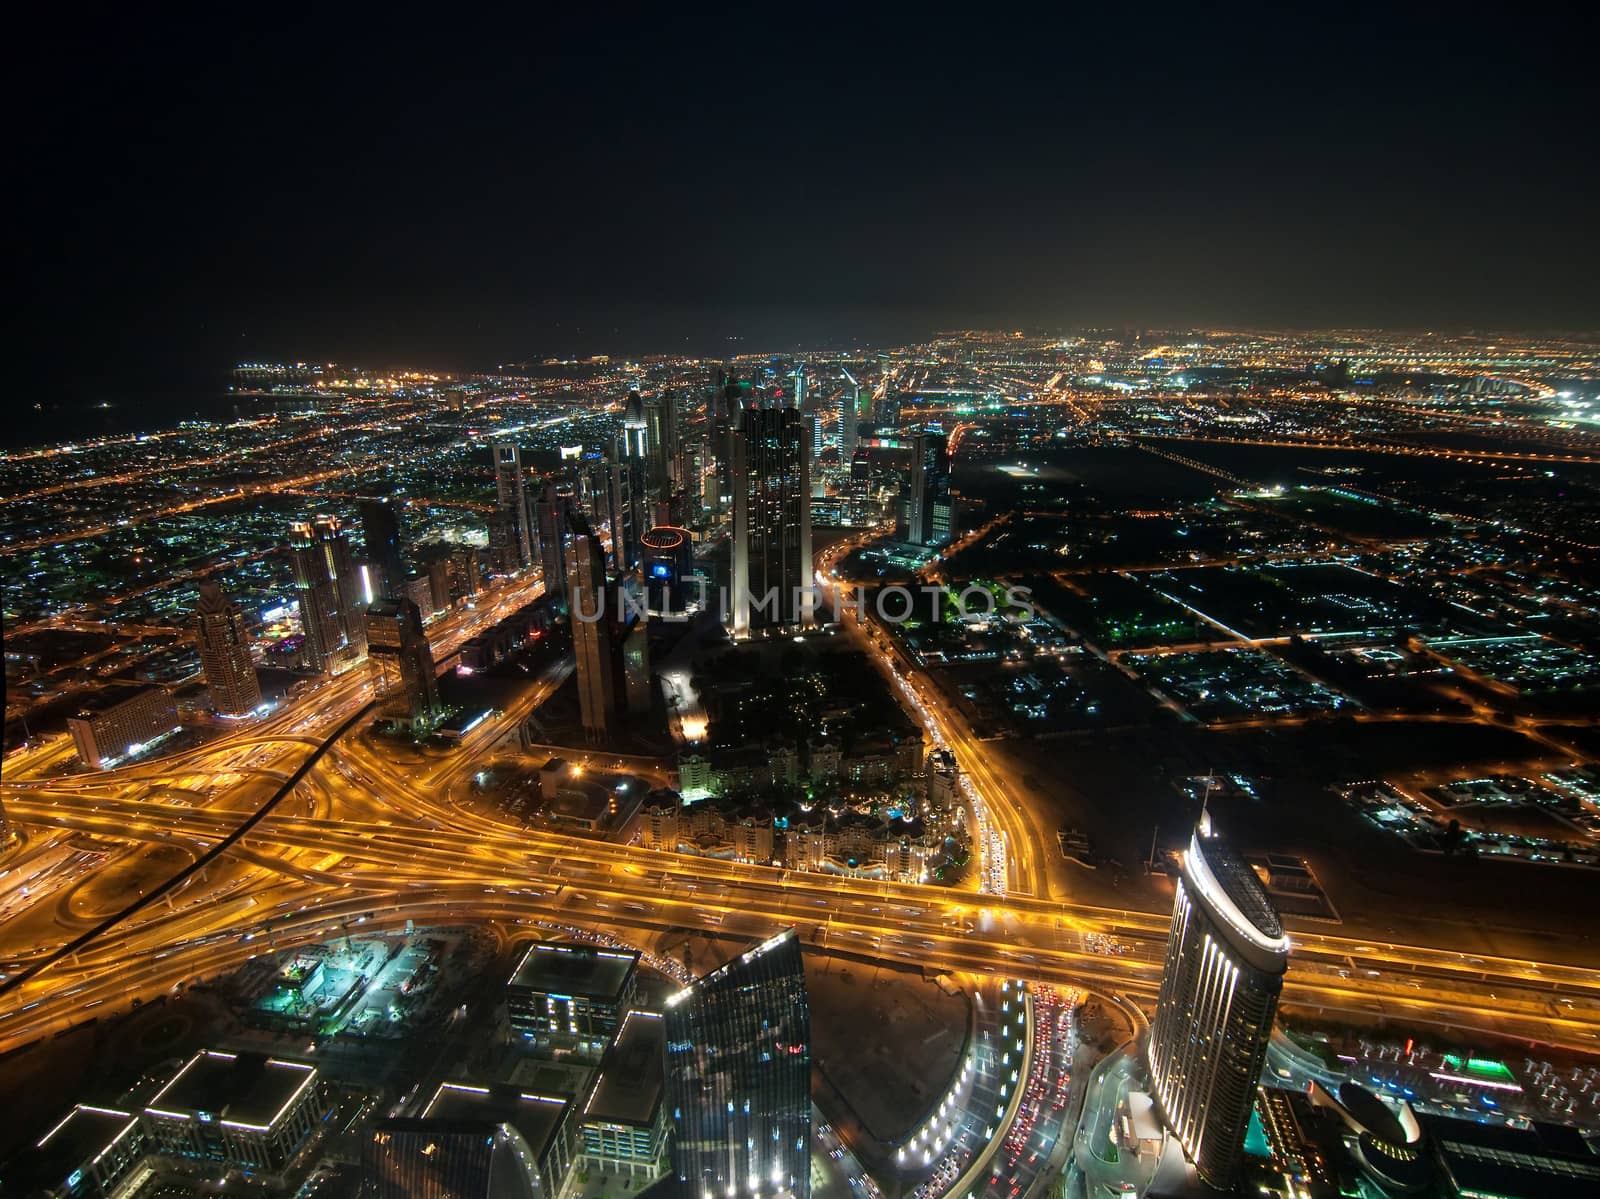 Skyscrapers in Dubai at night. View from the lookout Burj Khalifa. United Arab Emirates